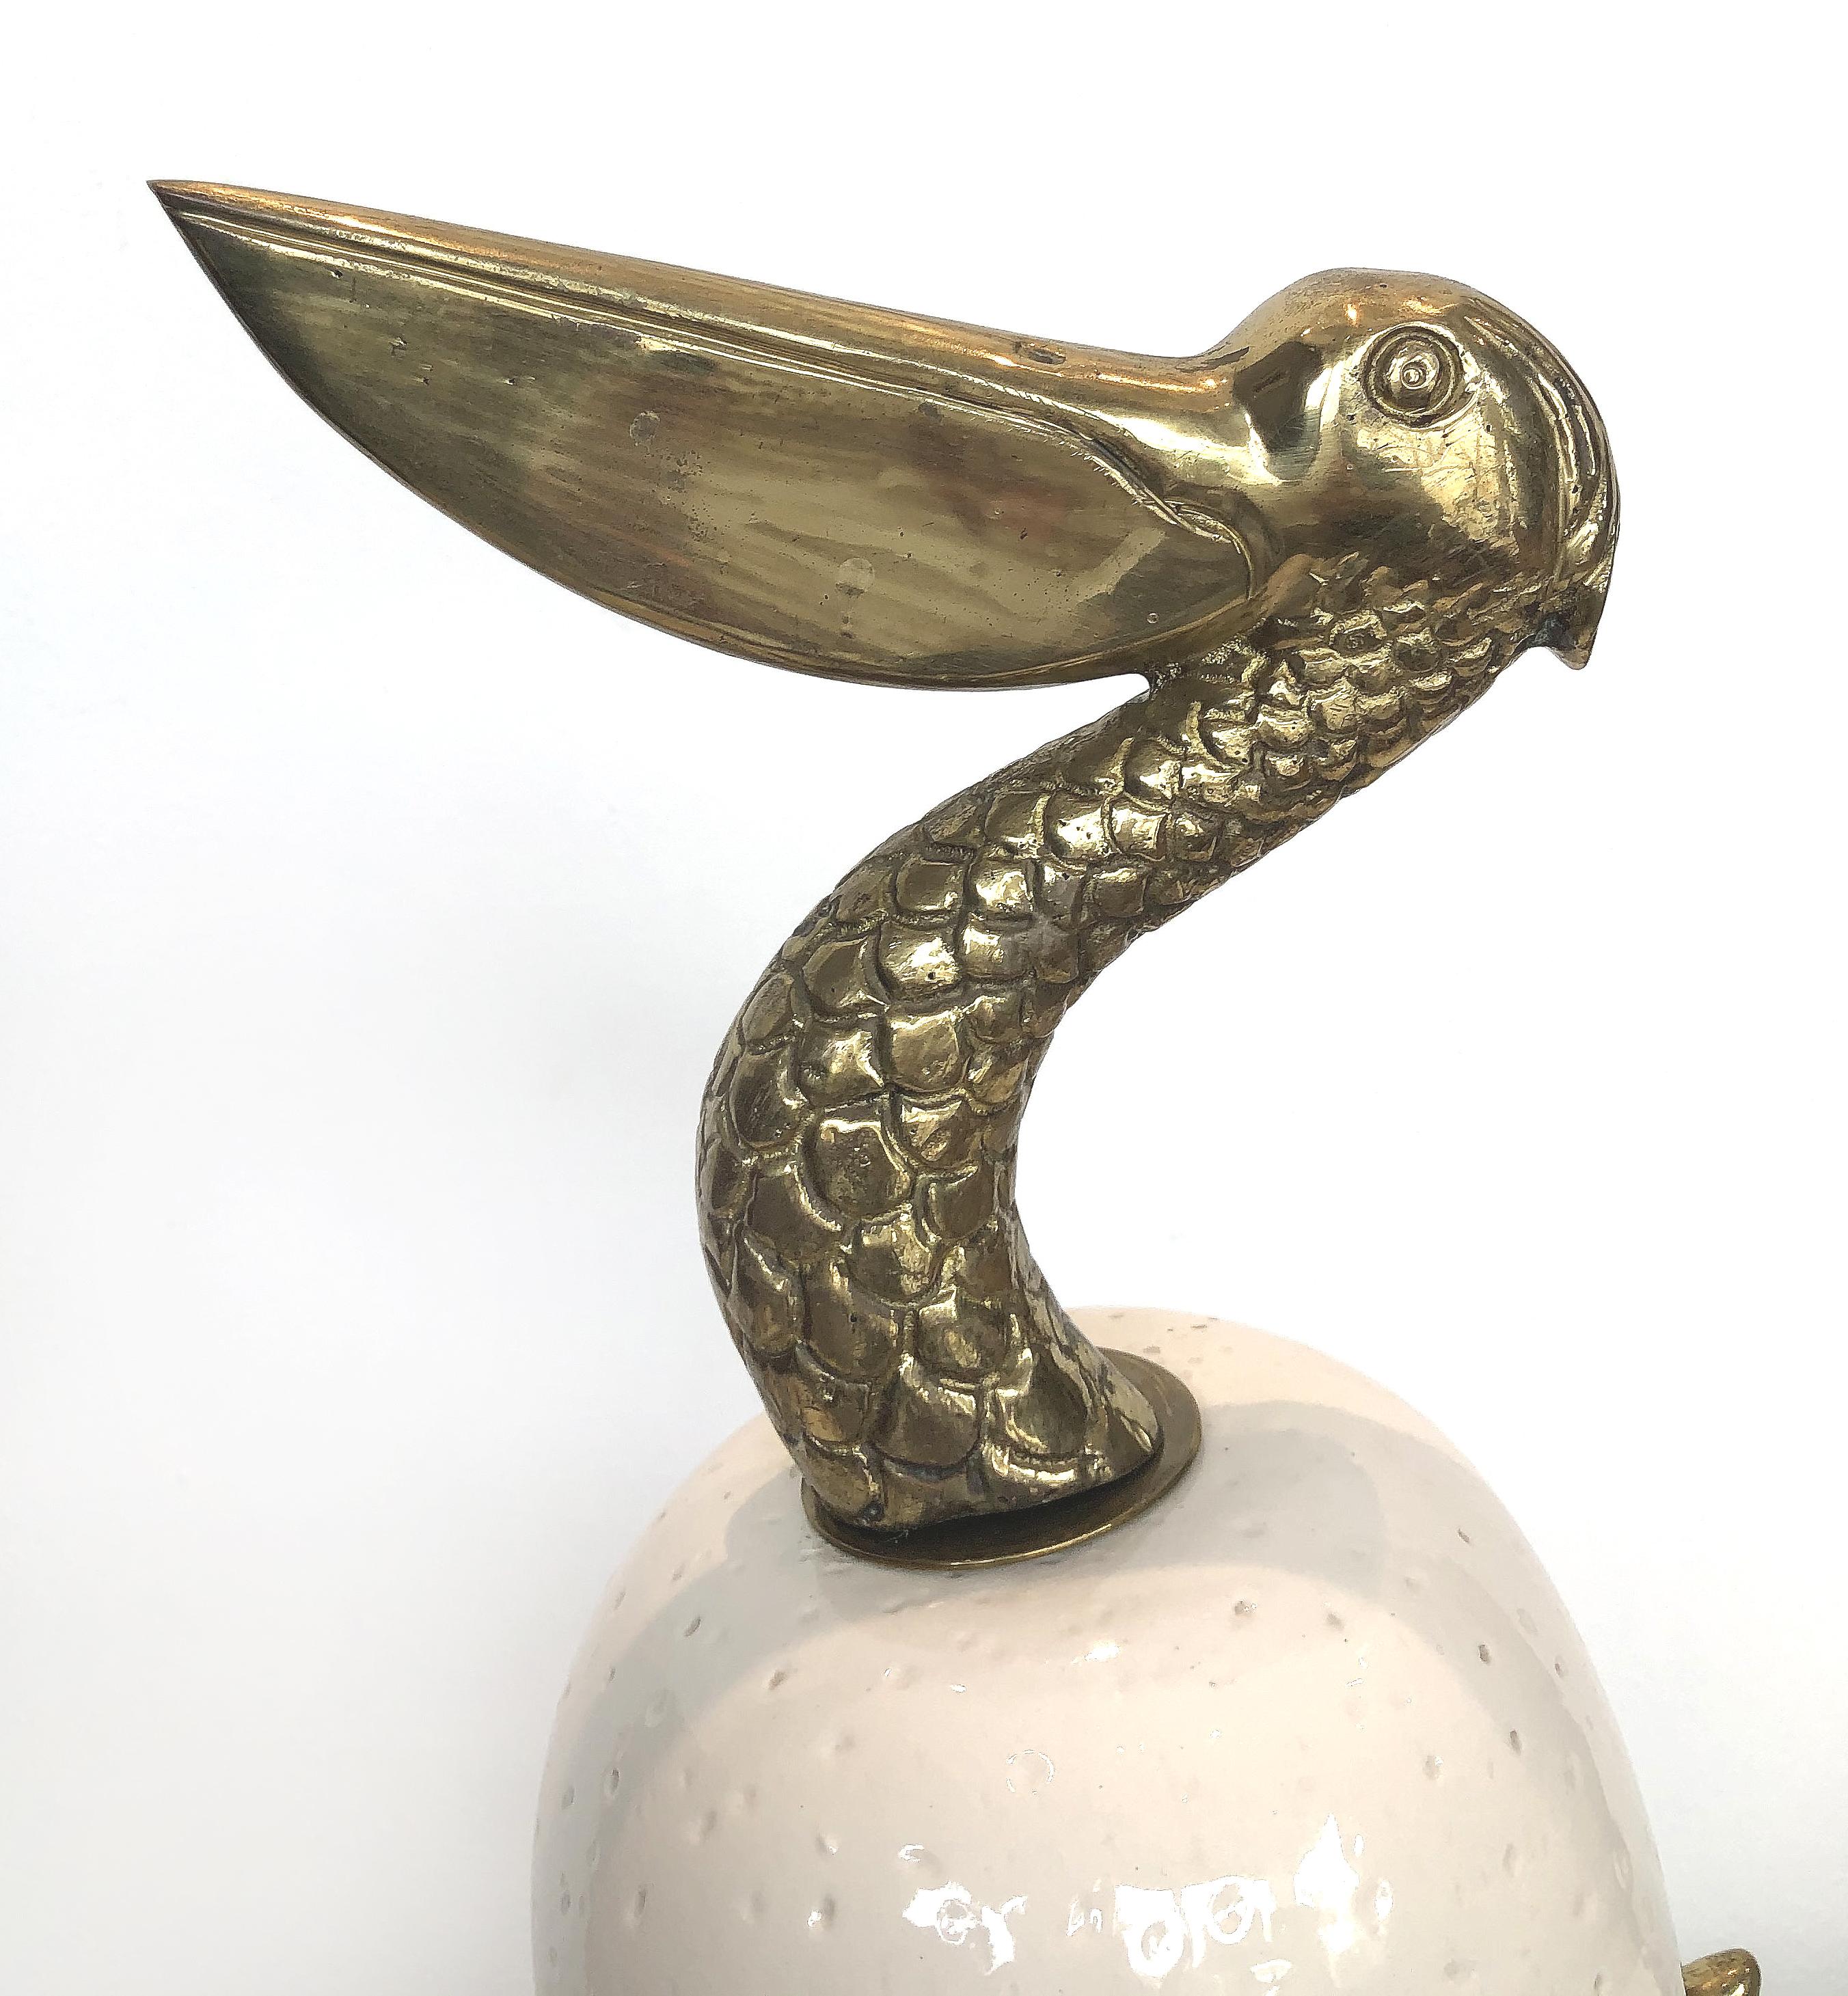 1980s, brass and glazed pottery pelican sculpture

Offered for sale is a 1980s vintage pottery pelican sculpture with brass details presented on a Lucite base. The pottery form is exquisitely glazed. The head, neck, and legs are brass.
   